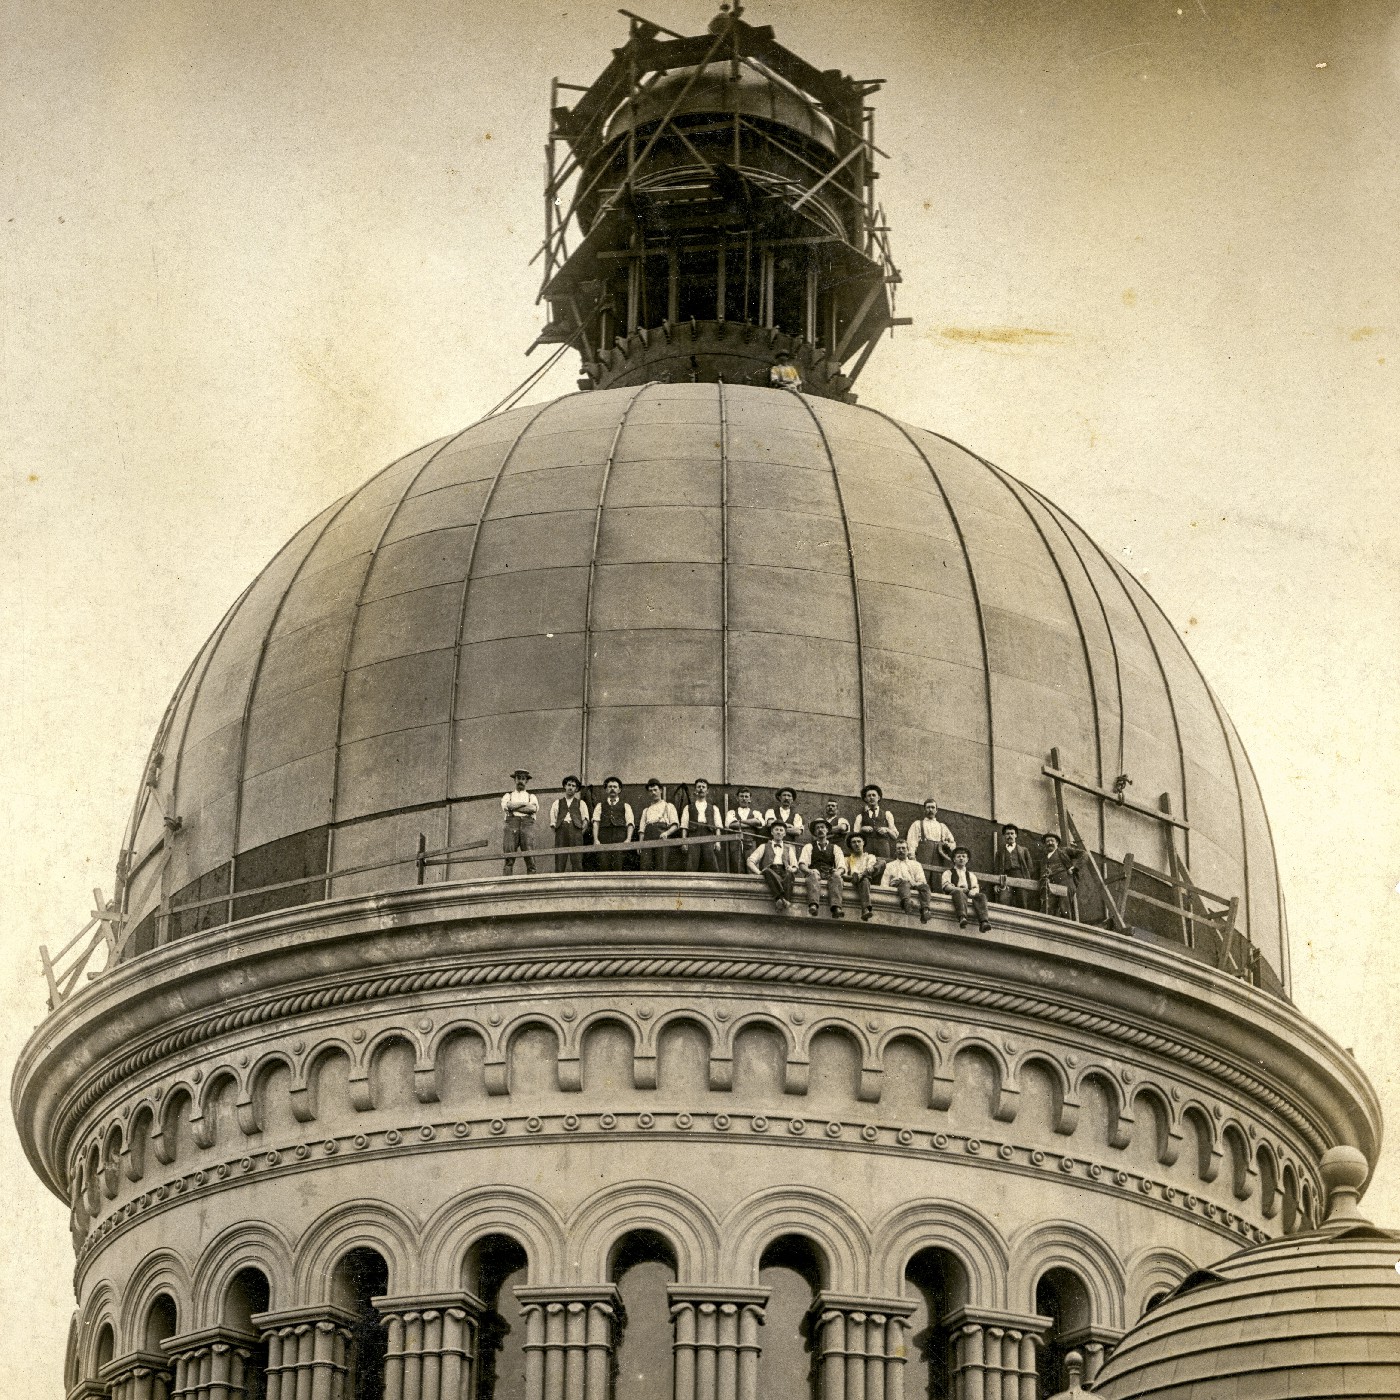 Construction of the Queen Victoria Building (QVB) dome, George Street Sydney, 1898 (A-00026861)